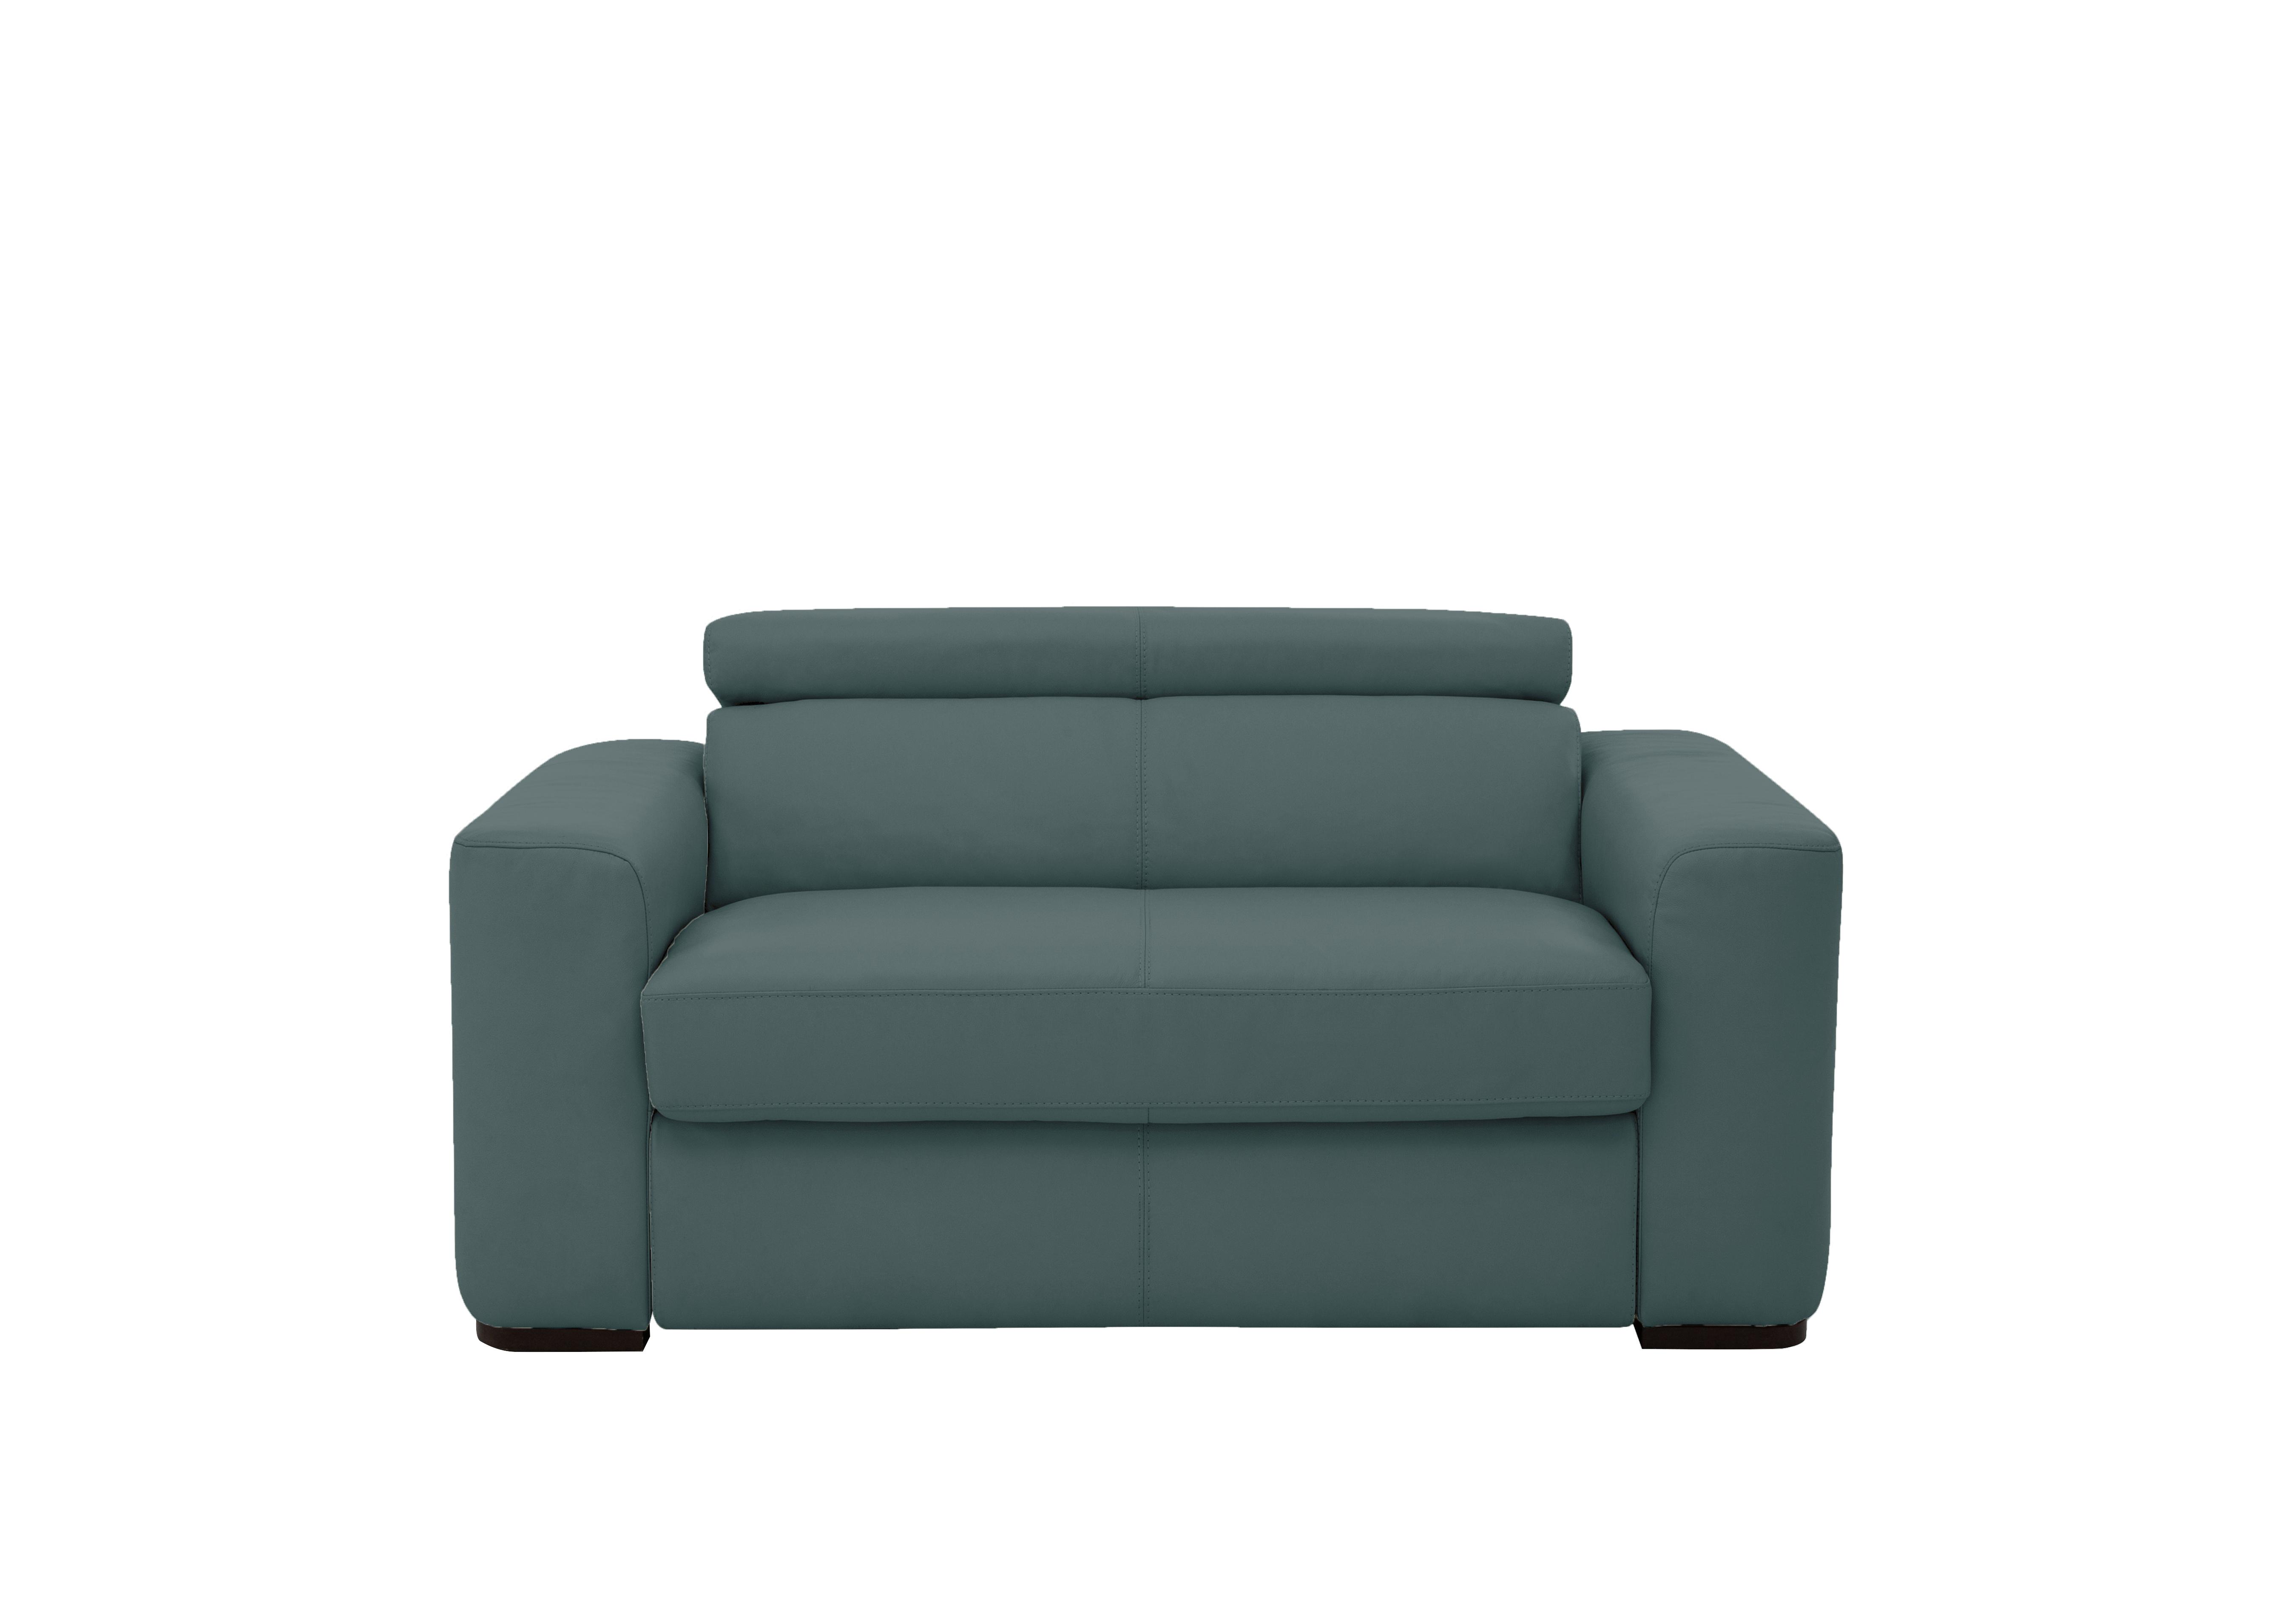 Infinity Leather Chair Sofabed in Bv-301e Lake Green on Furniture Village